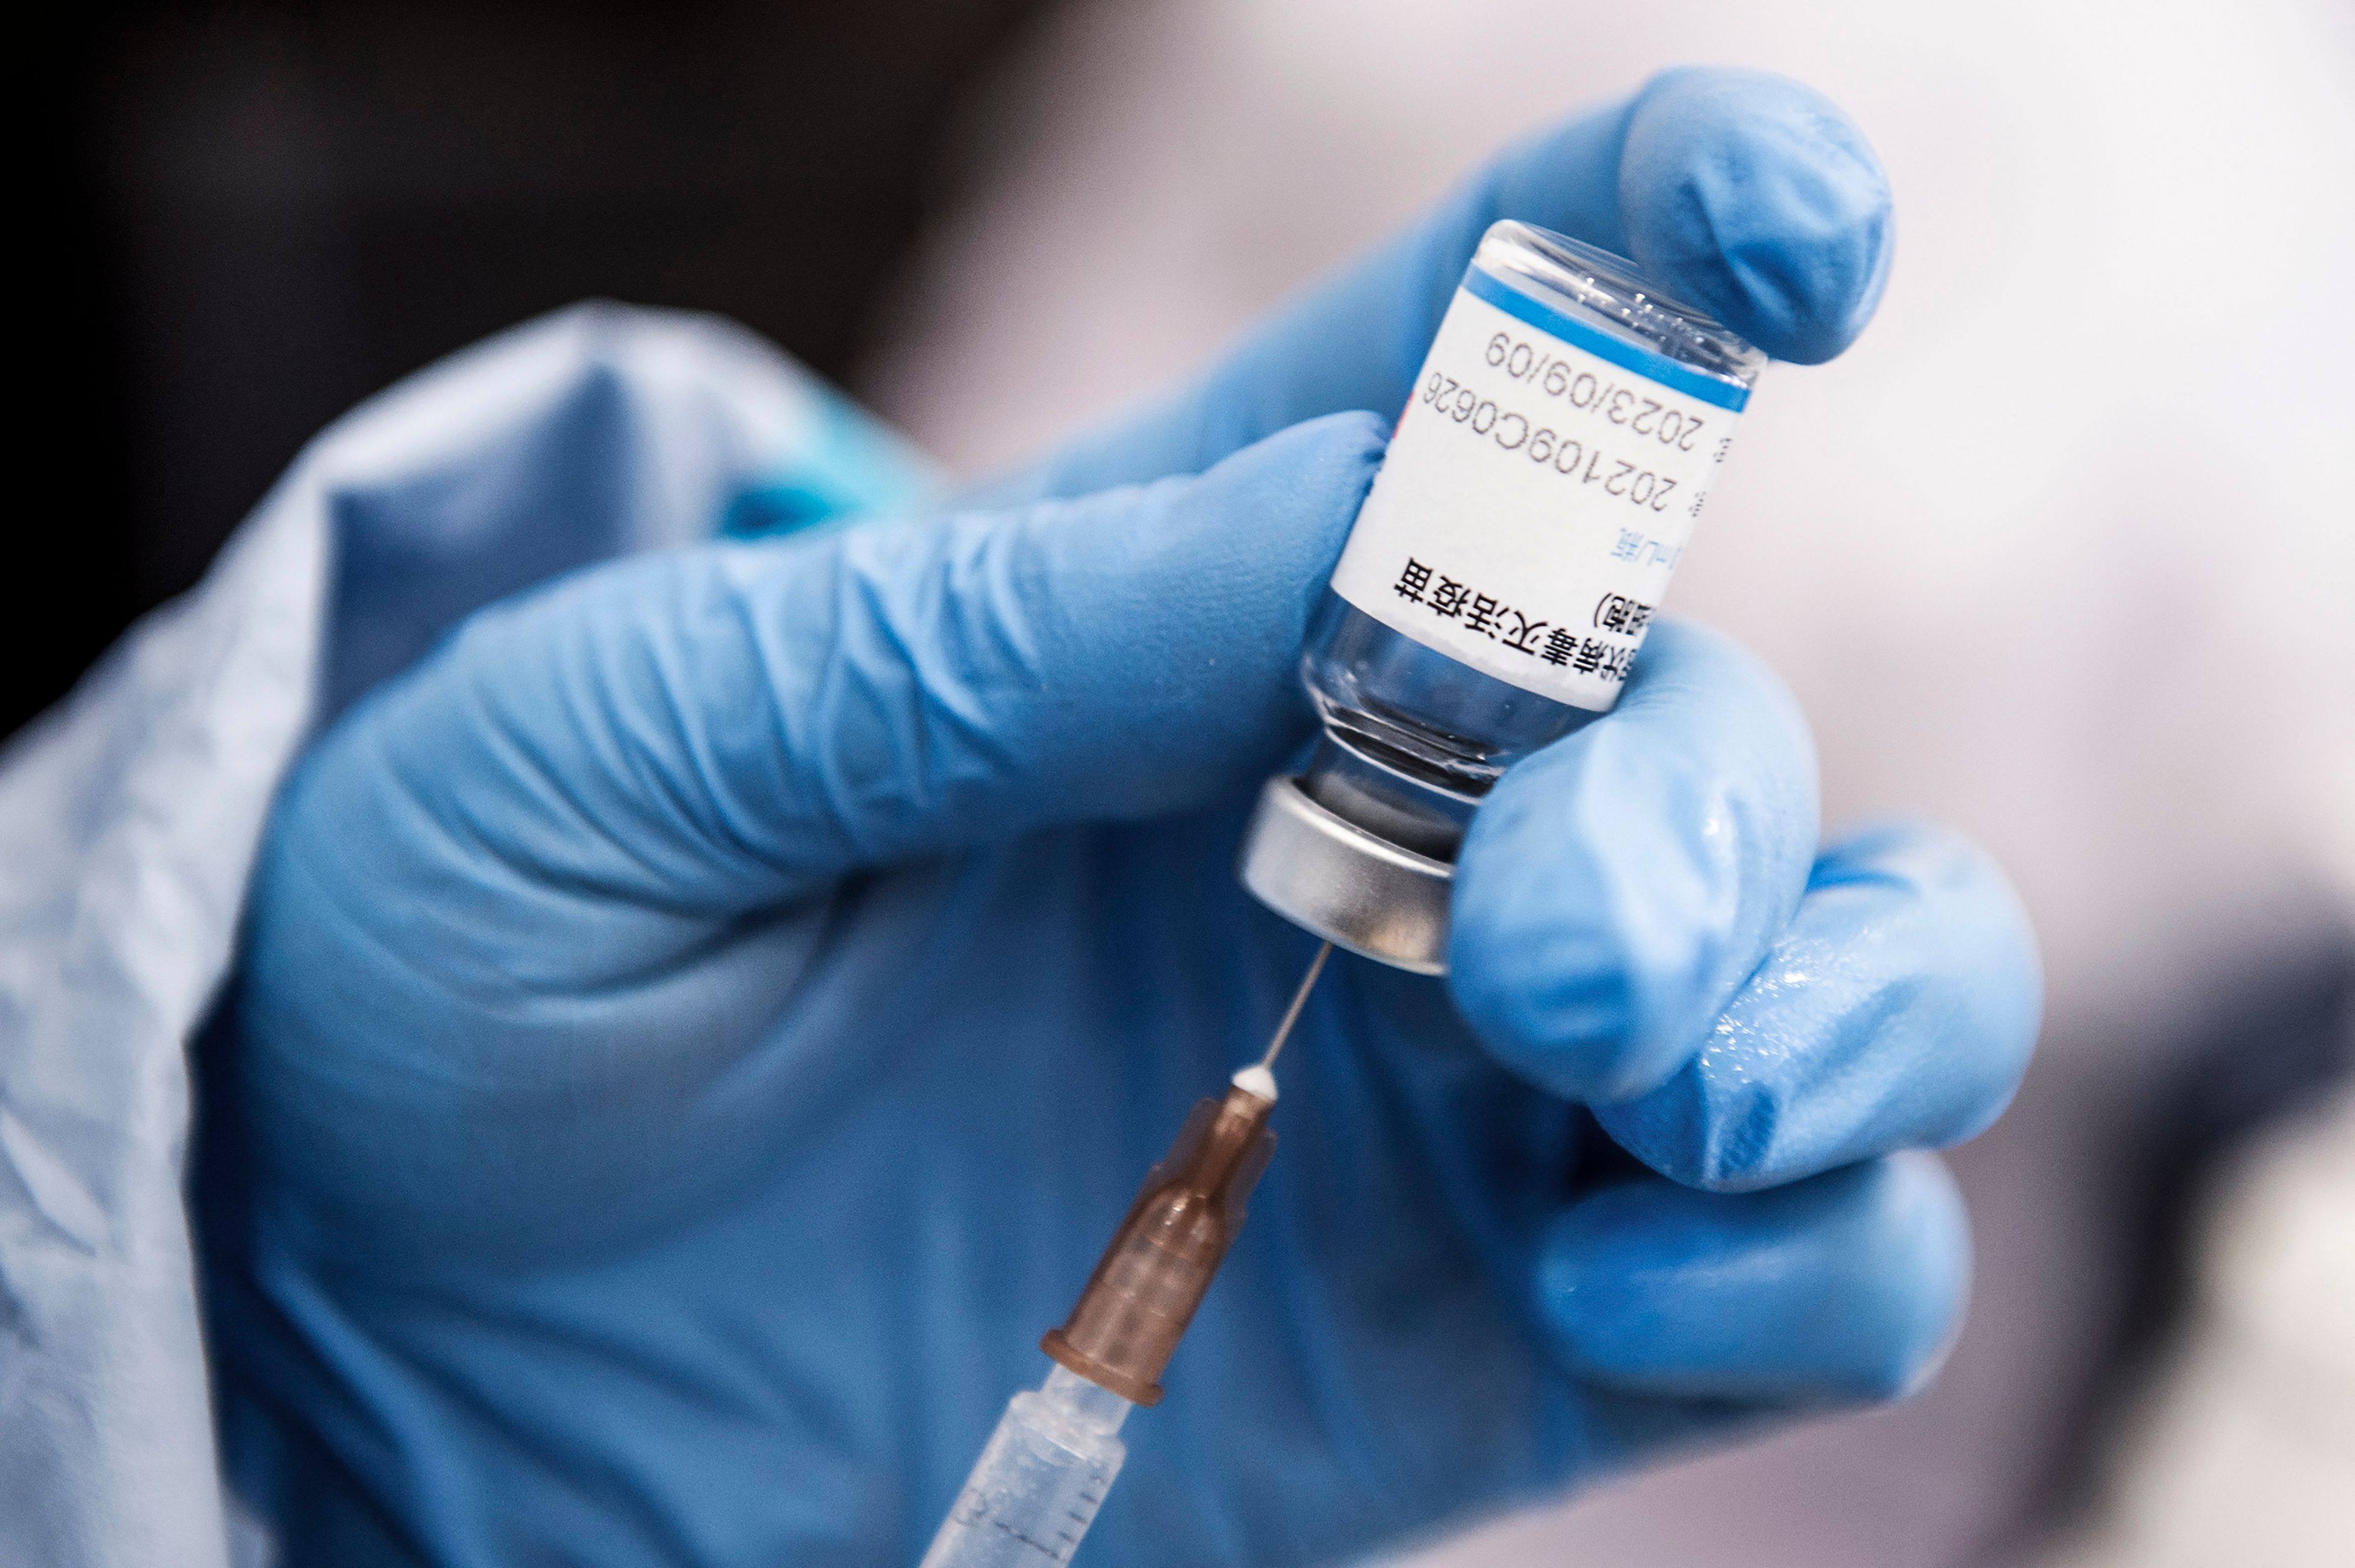 A third dose of the vaccine was found to be “the turning point” on immune response for most study participants. Photo: AFP